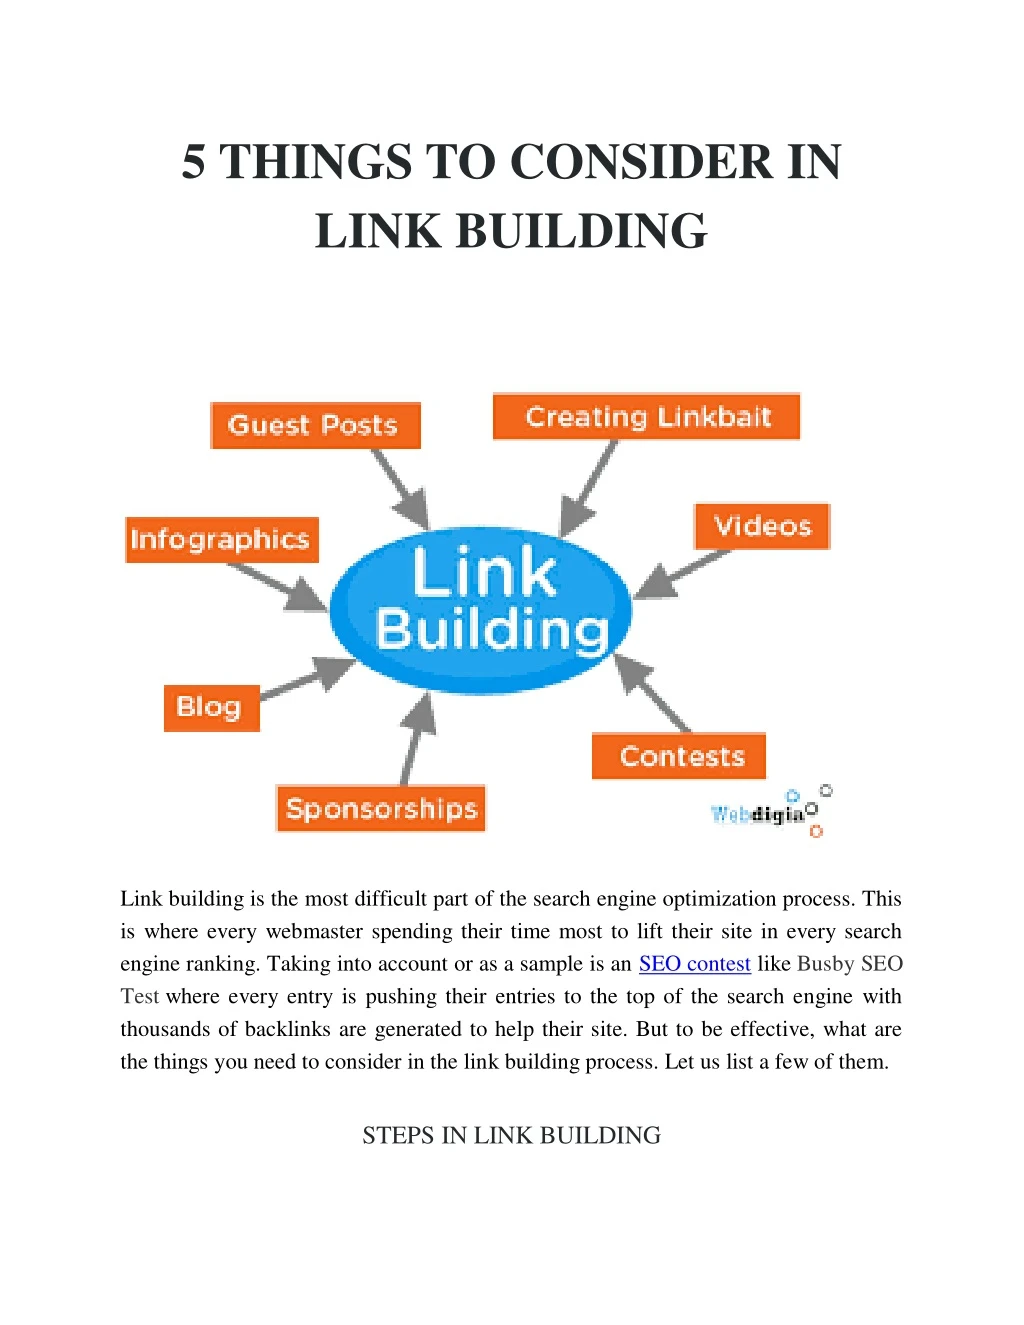 5 things to consider in link building